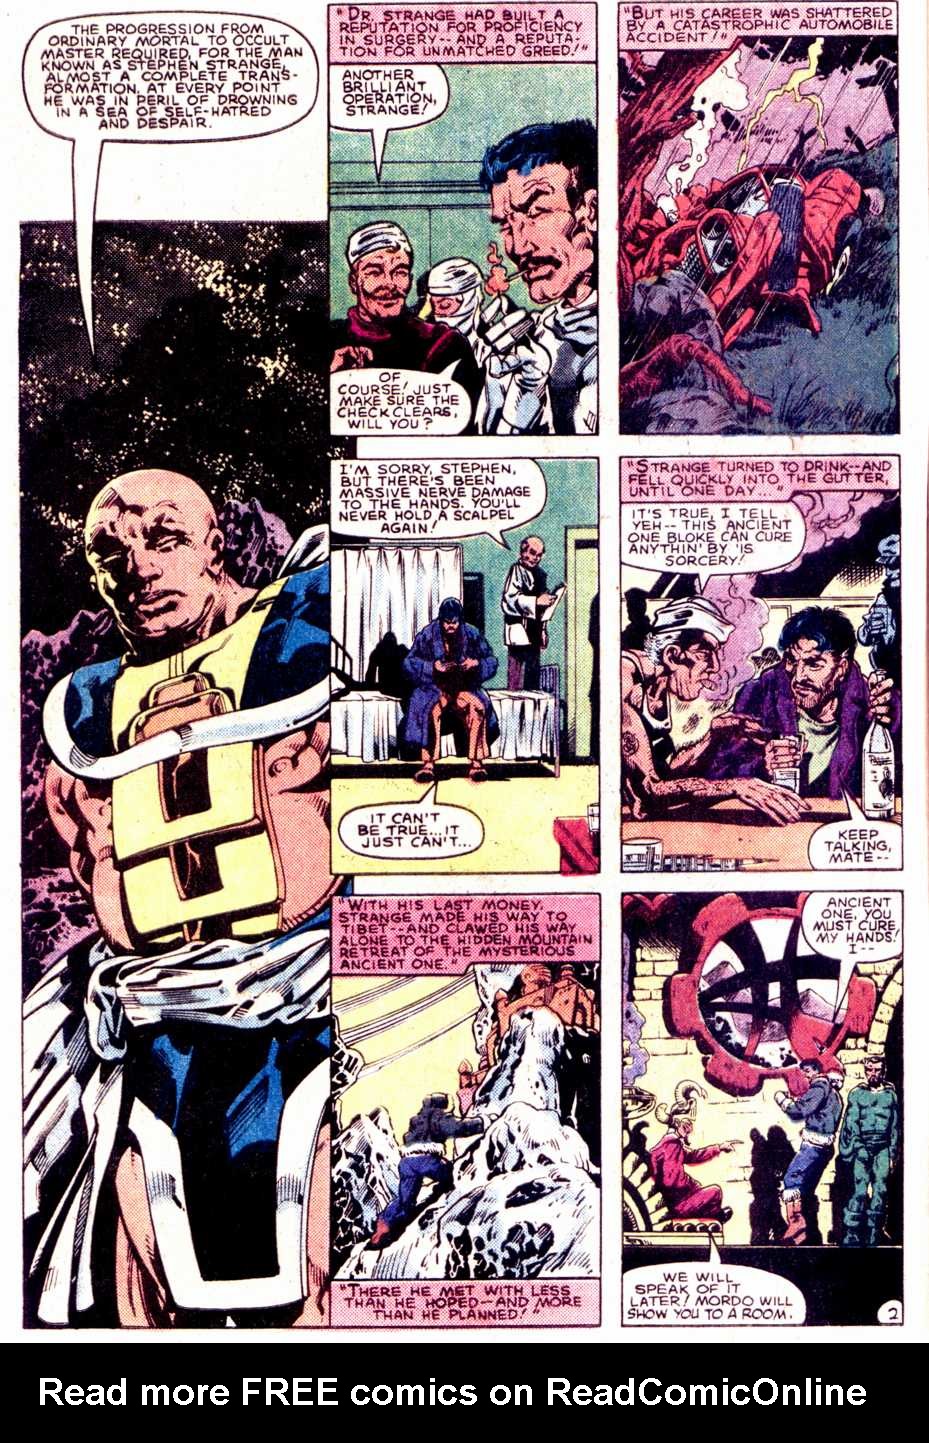 What If? (1977) issue 40 - Dr Strange had not become master of The mystic arts - Page 3